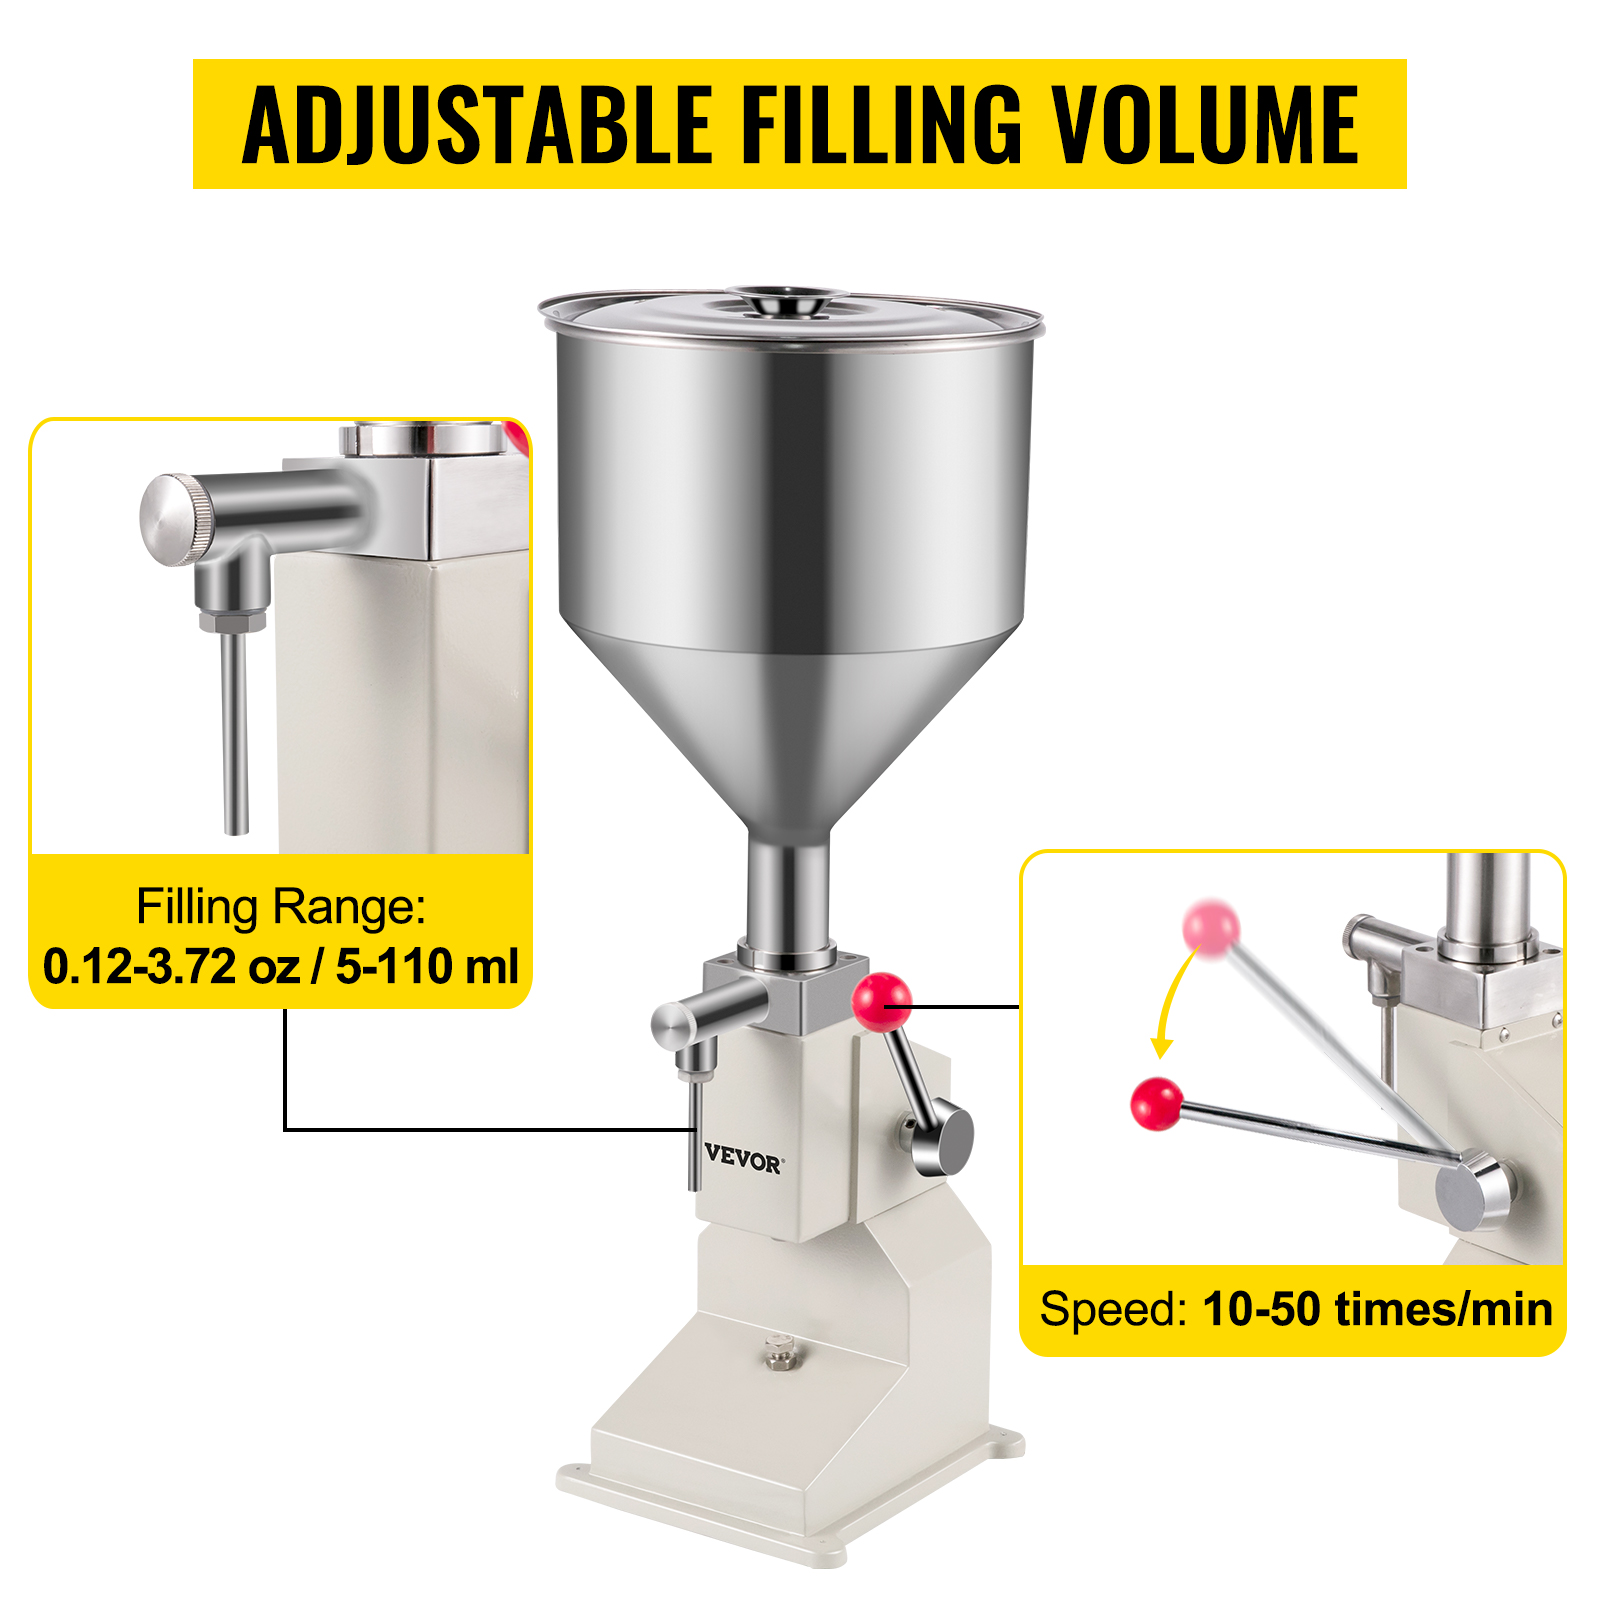 Miumaoev Manual Liquid Filling Machine Stainless Steel, Bottle Filler  5-50ml for Paste Cream Cosmetic, Lipgloss Machine, Liquid Filling Machine,  Bottle Filling Machine, Safe and Reliable 